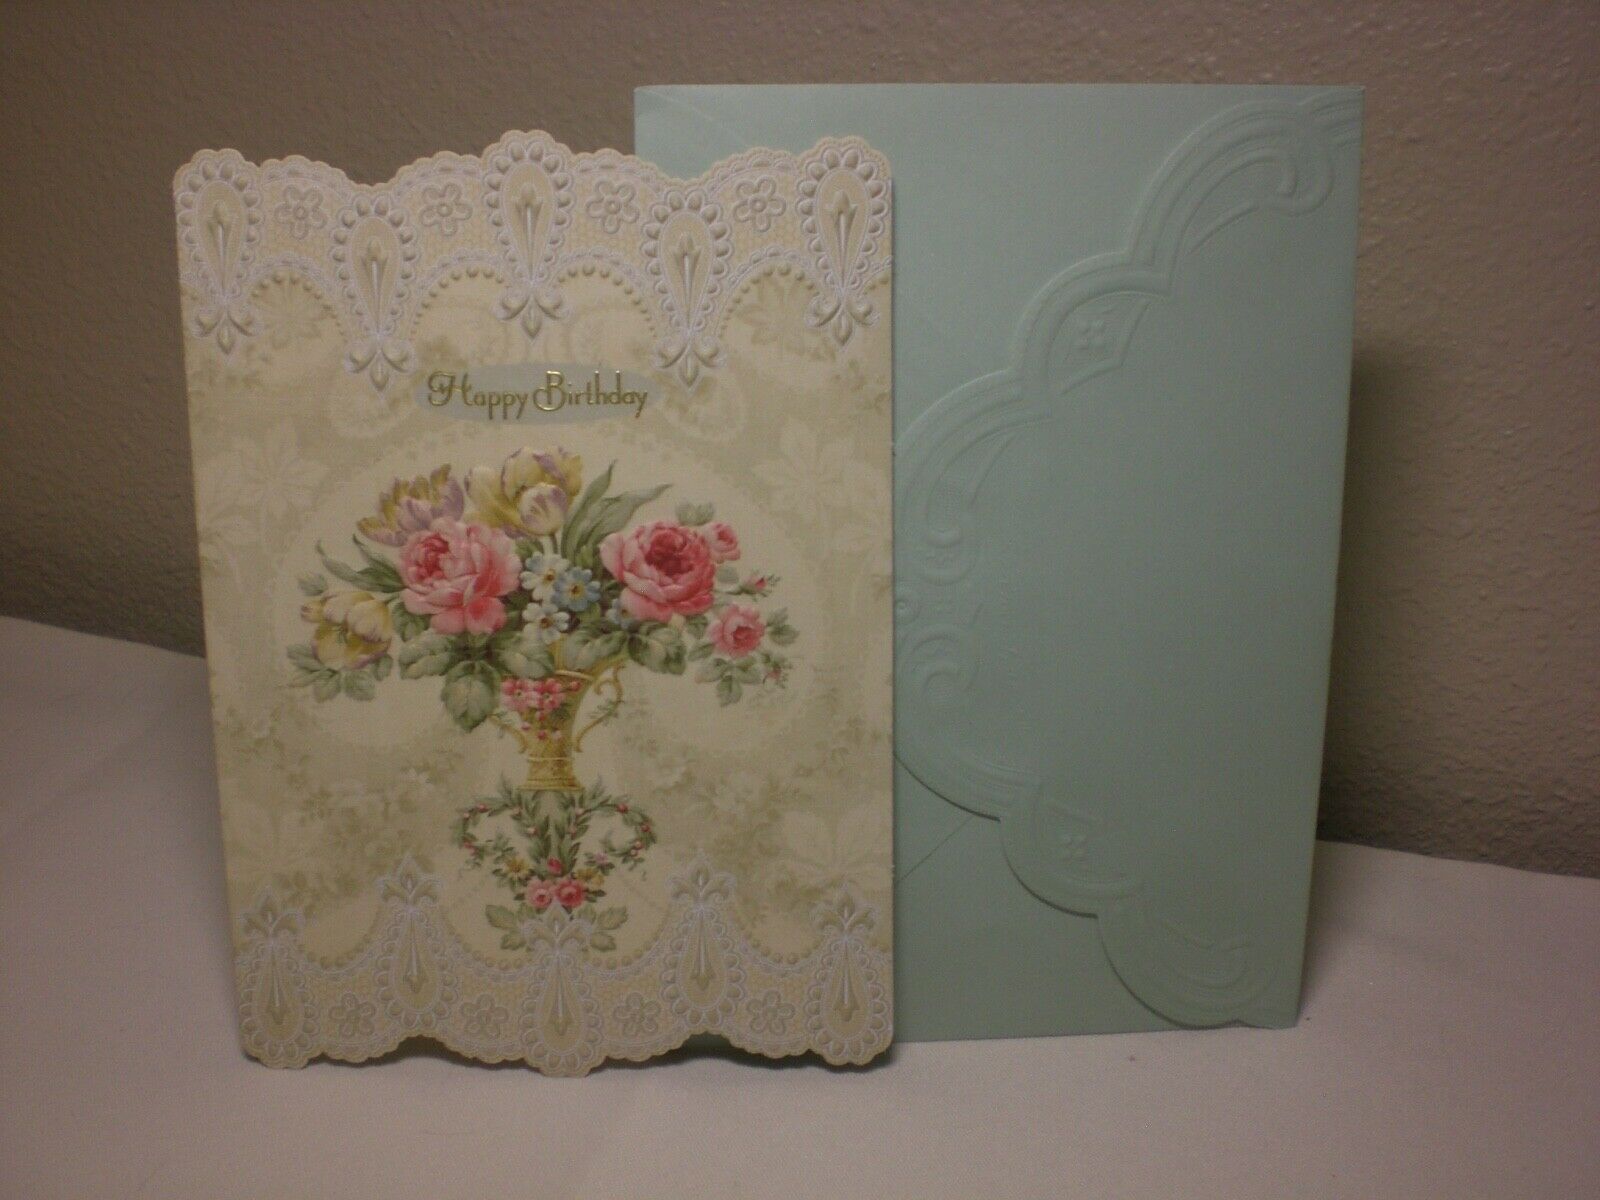 Carol's Rose Garden -  Birthday Card - A Beautiful Vase Of Flowers On The Front